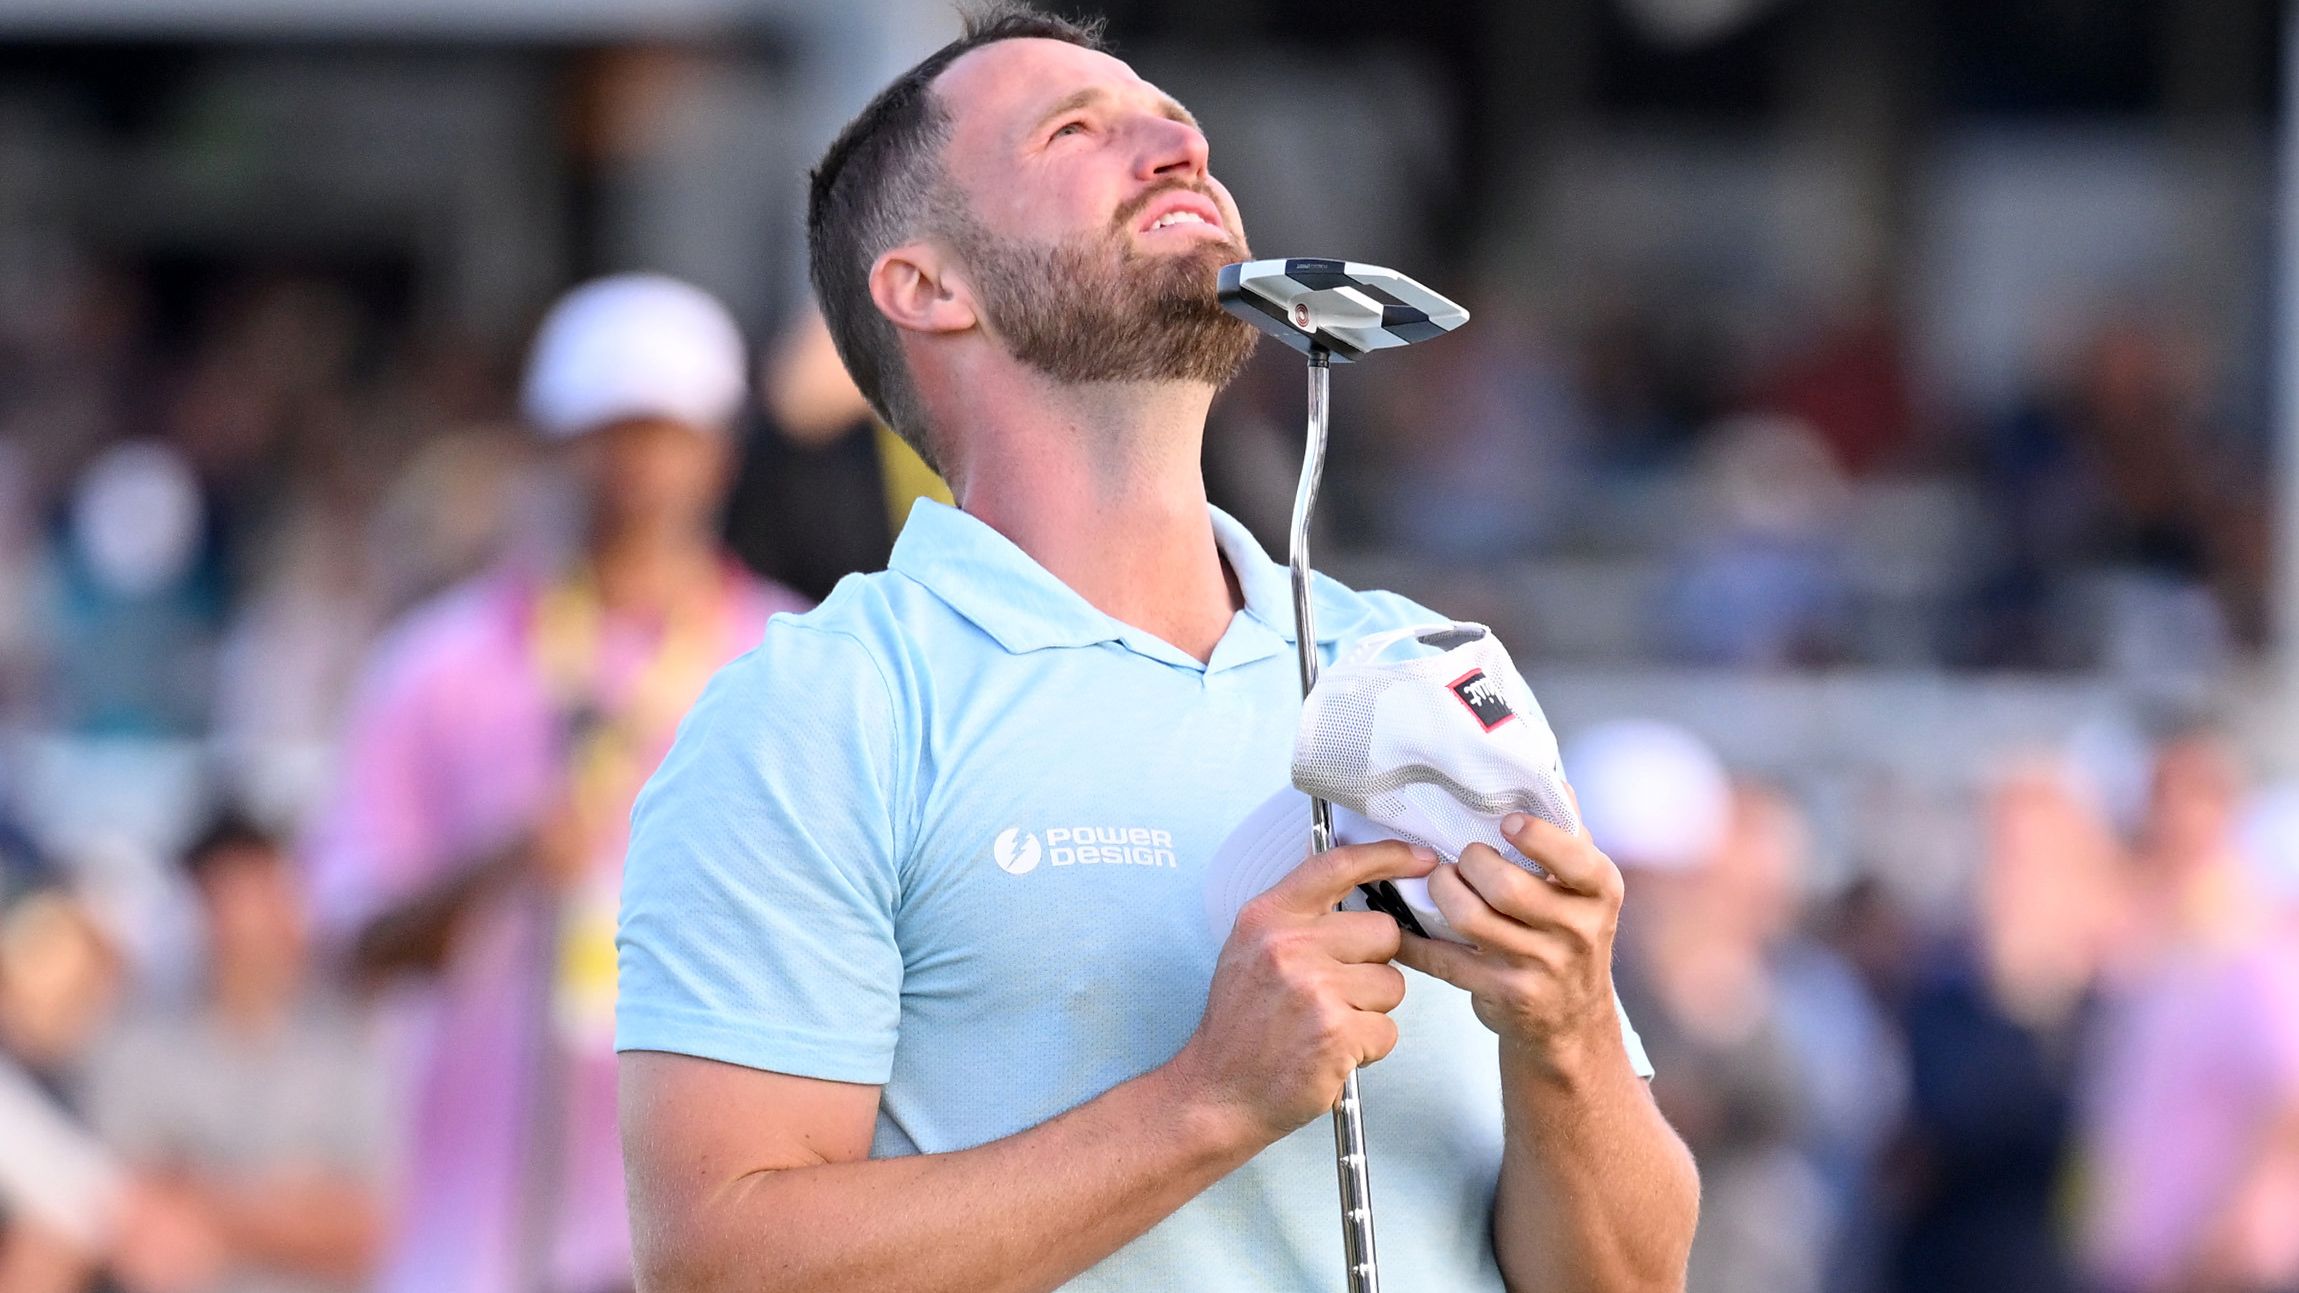 American golfer Wyndham Clark bursts into tears after winning in tribute to late mother